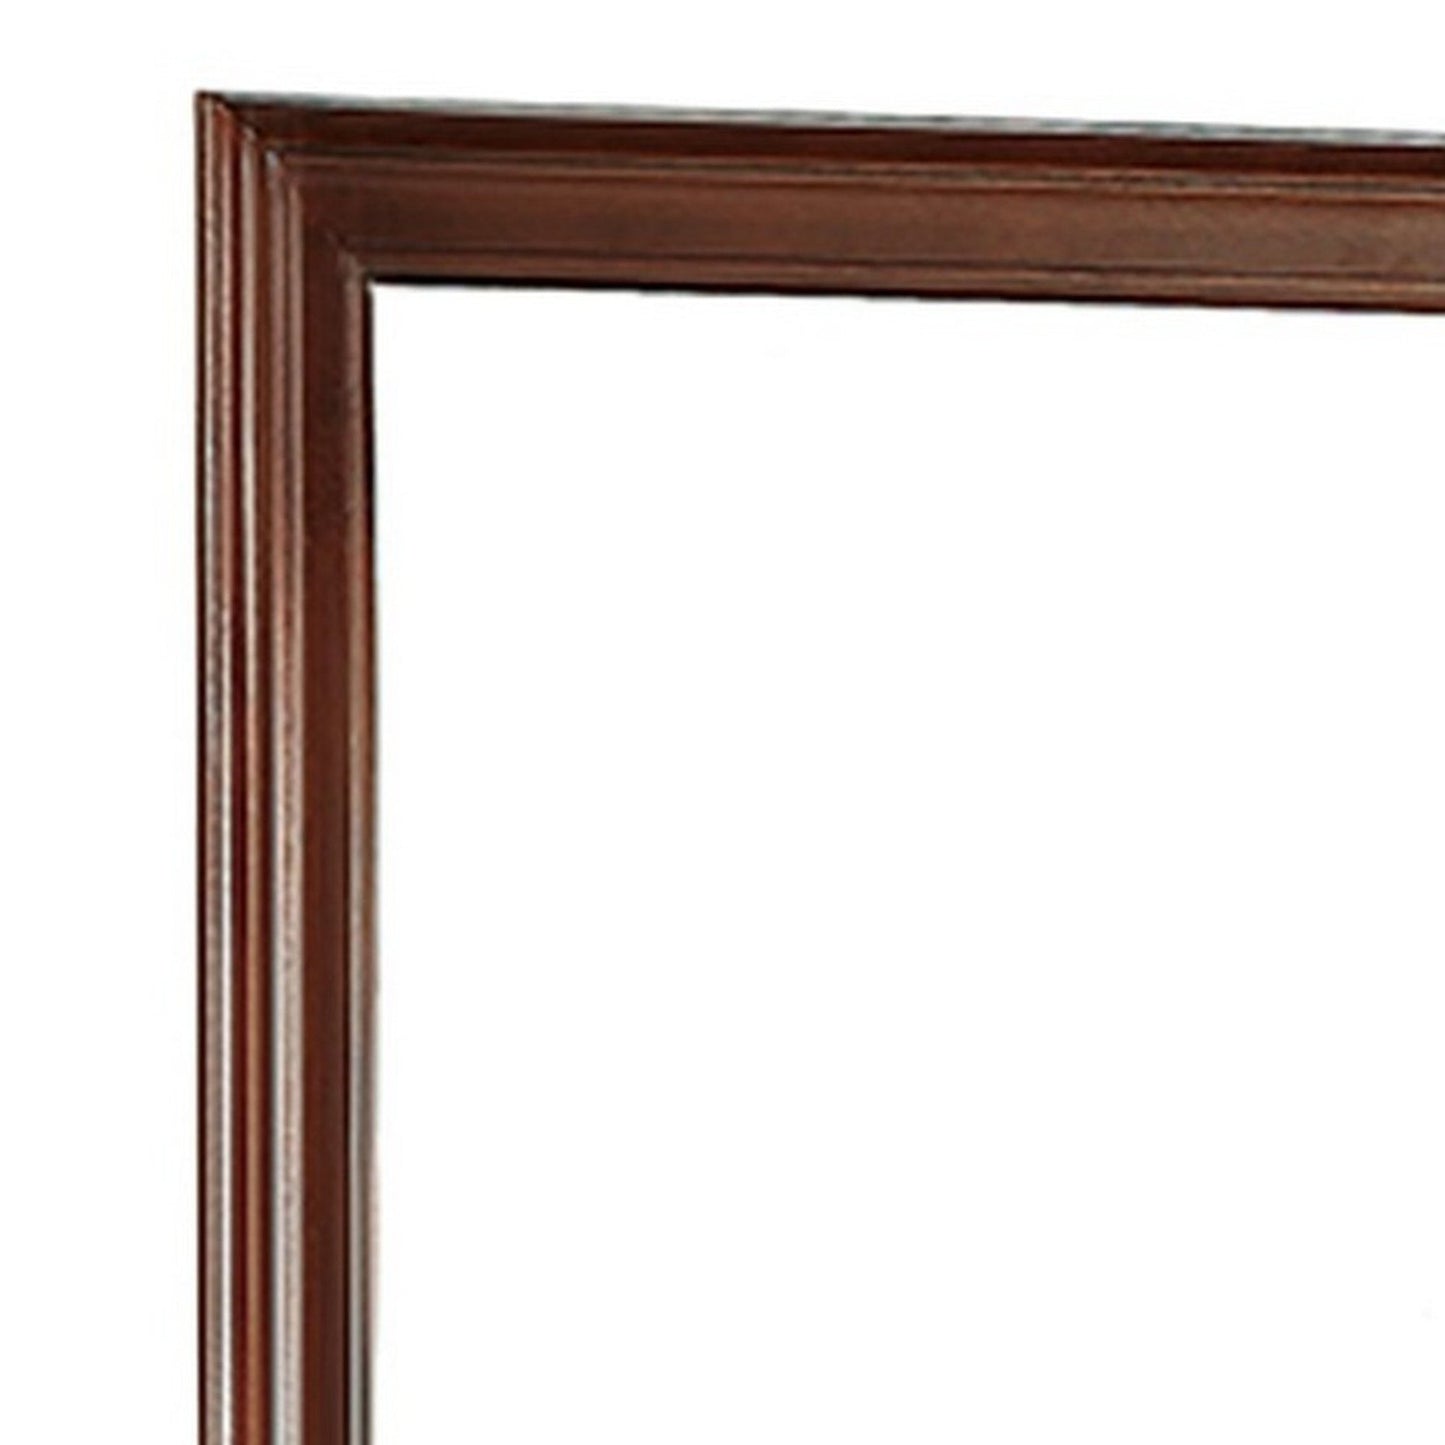 Benzara Cherry Brown and Silver Wooden Frame Mirror With Mounting Hardware